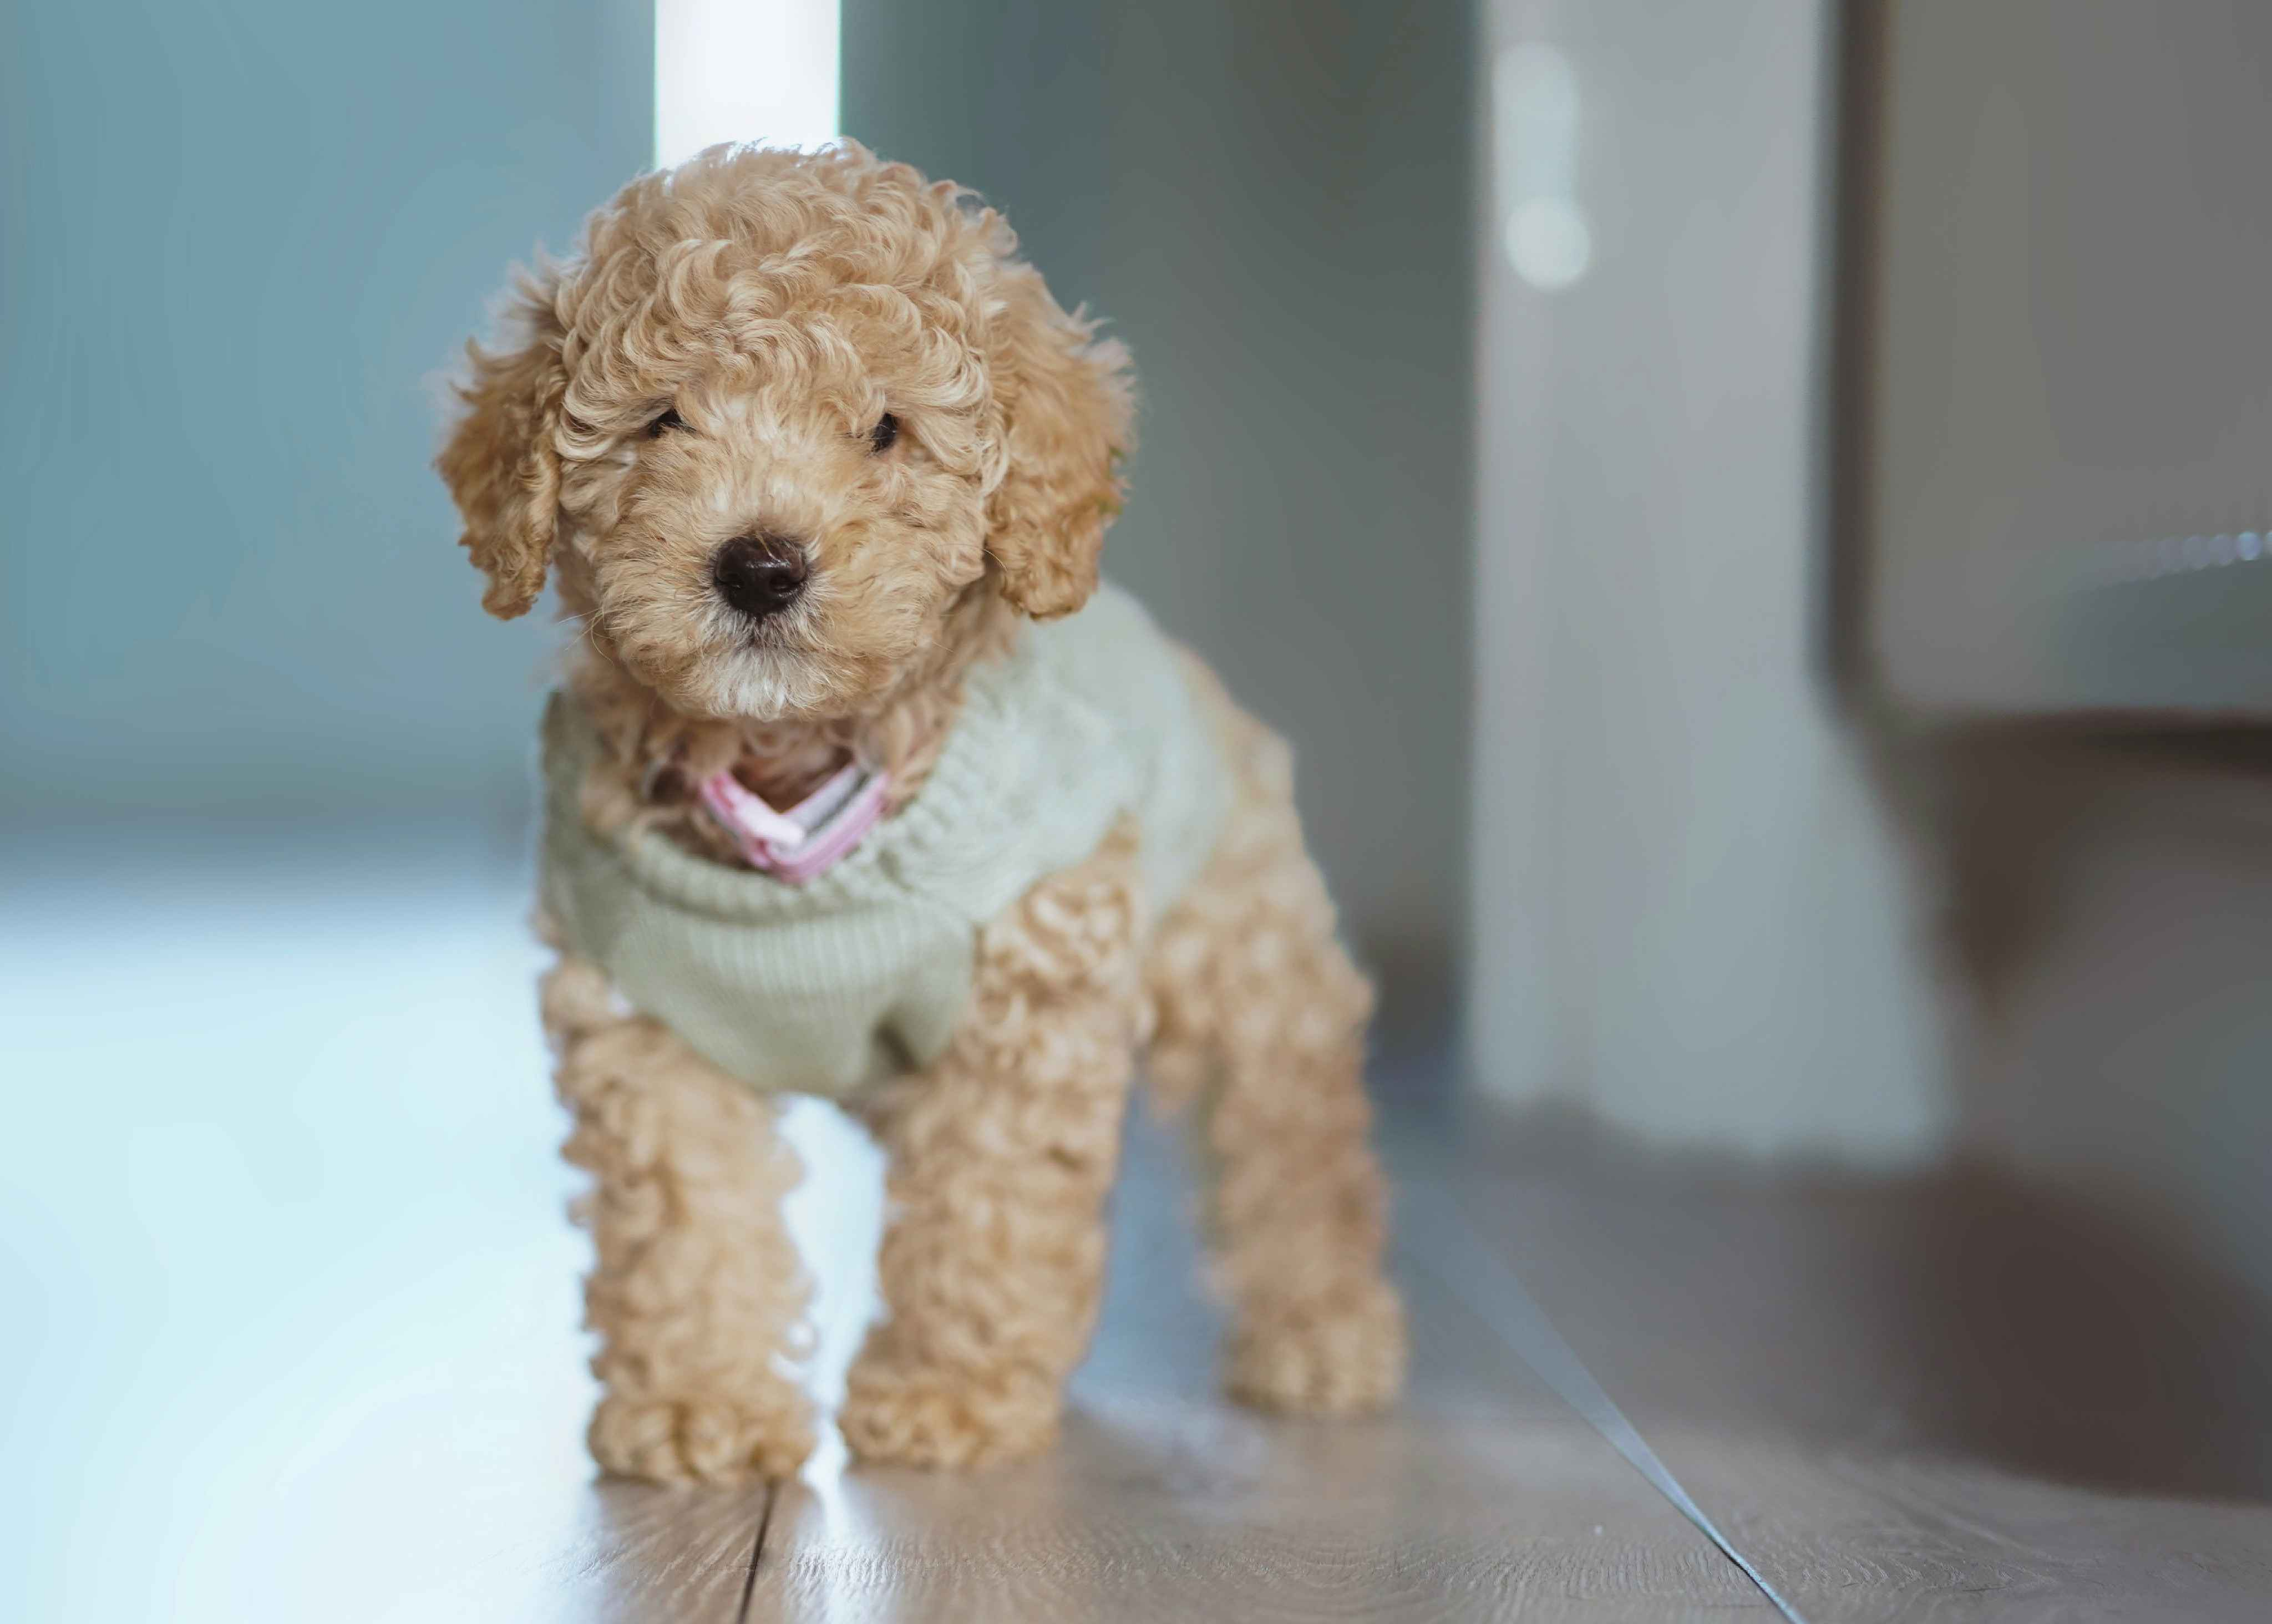 Can Poodles develop certain types of muscular or skeletal disorders? How can these conditions be managed or treated?